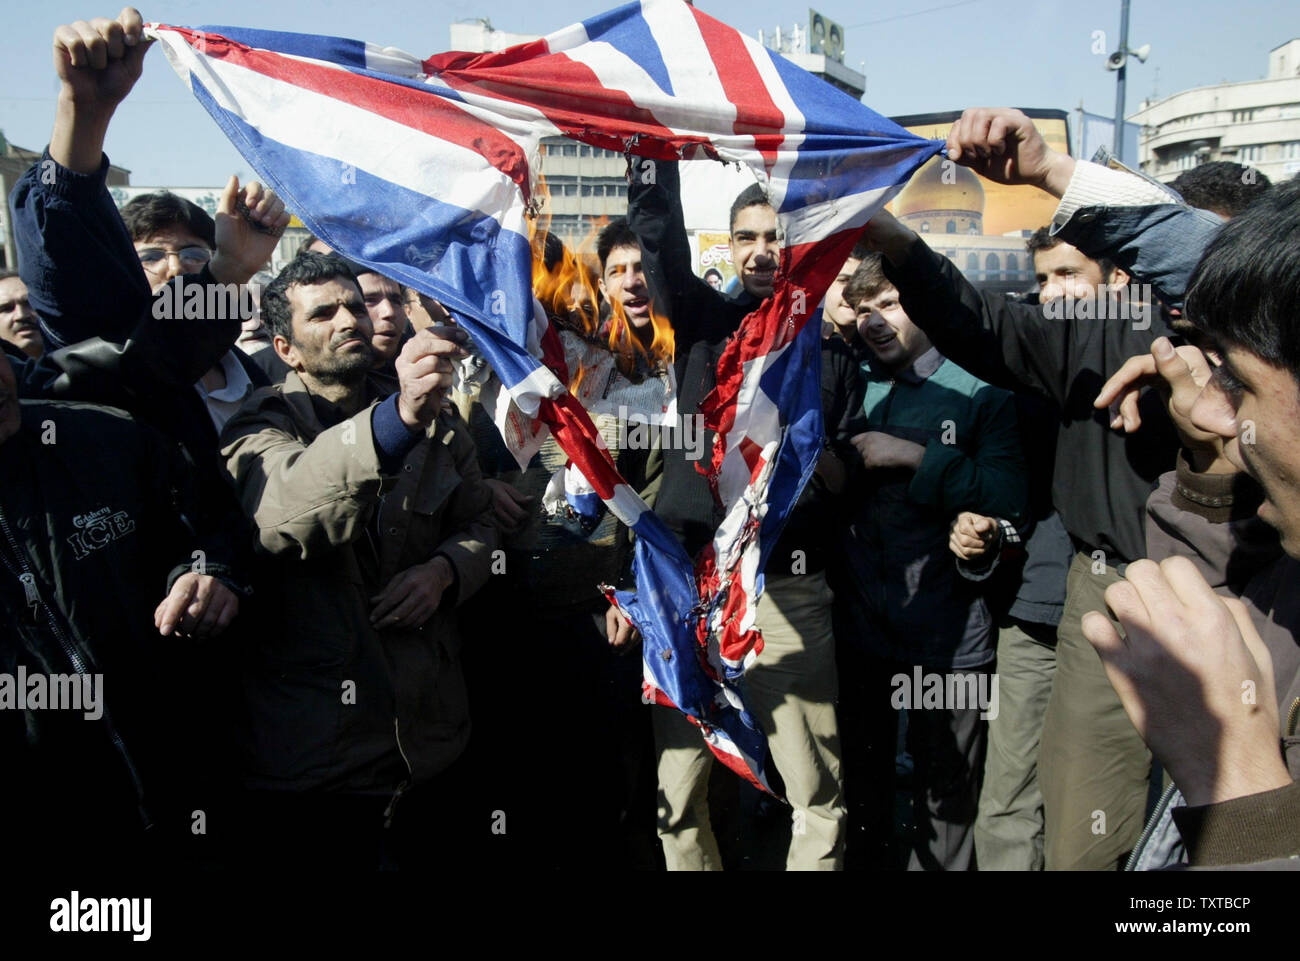 Iranians burn a British flag while protesting after weekly Friday prayer at Tehran University in Tehran, Iran on February 24, 2006.  The protest is over the destruction of a Shiite shrine in Samarra, Iraq by bomb. (UPI Photo/Mohammad Kheirkhah) Stock Photo